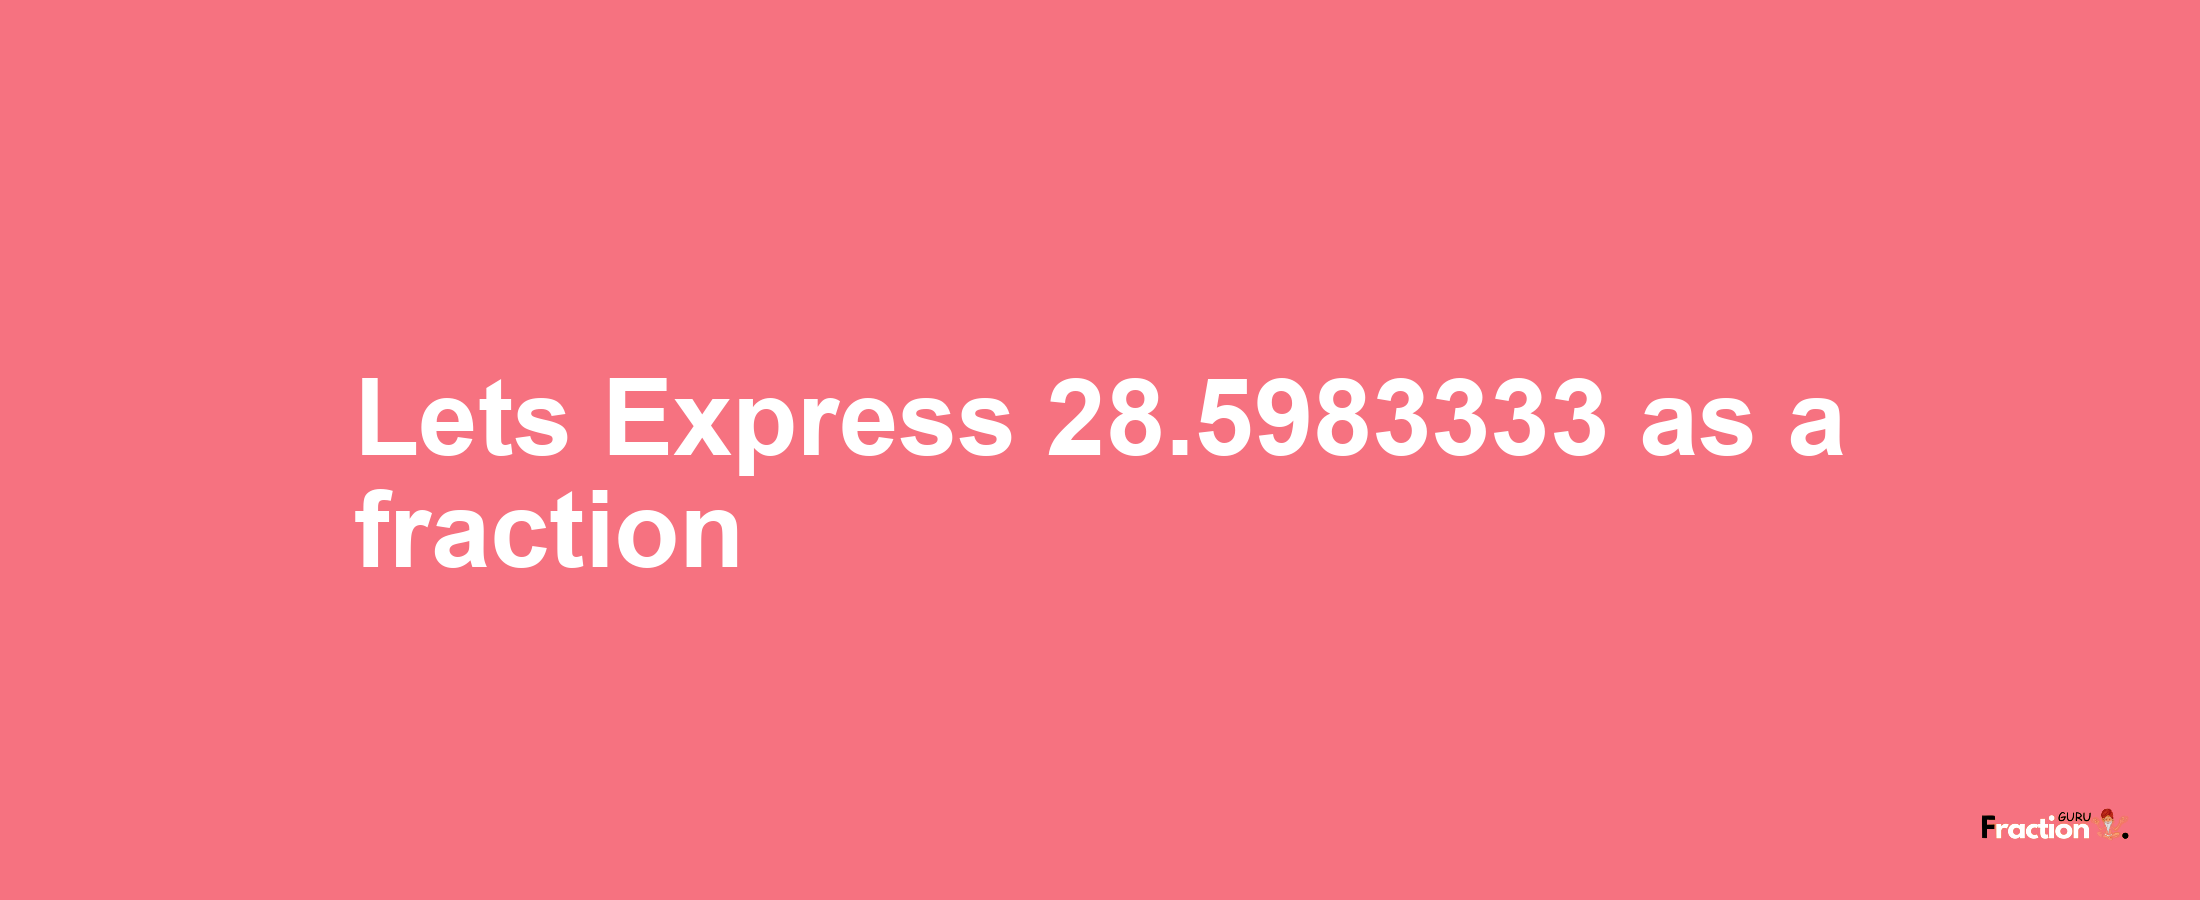 Lets Express 28.5983333 as afraction